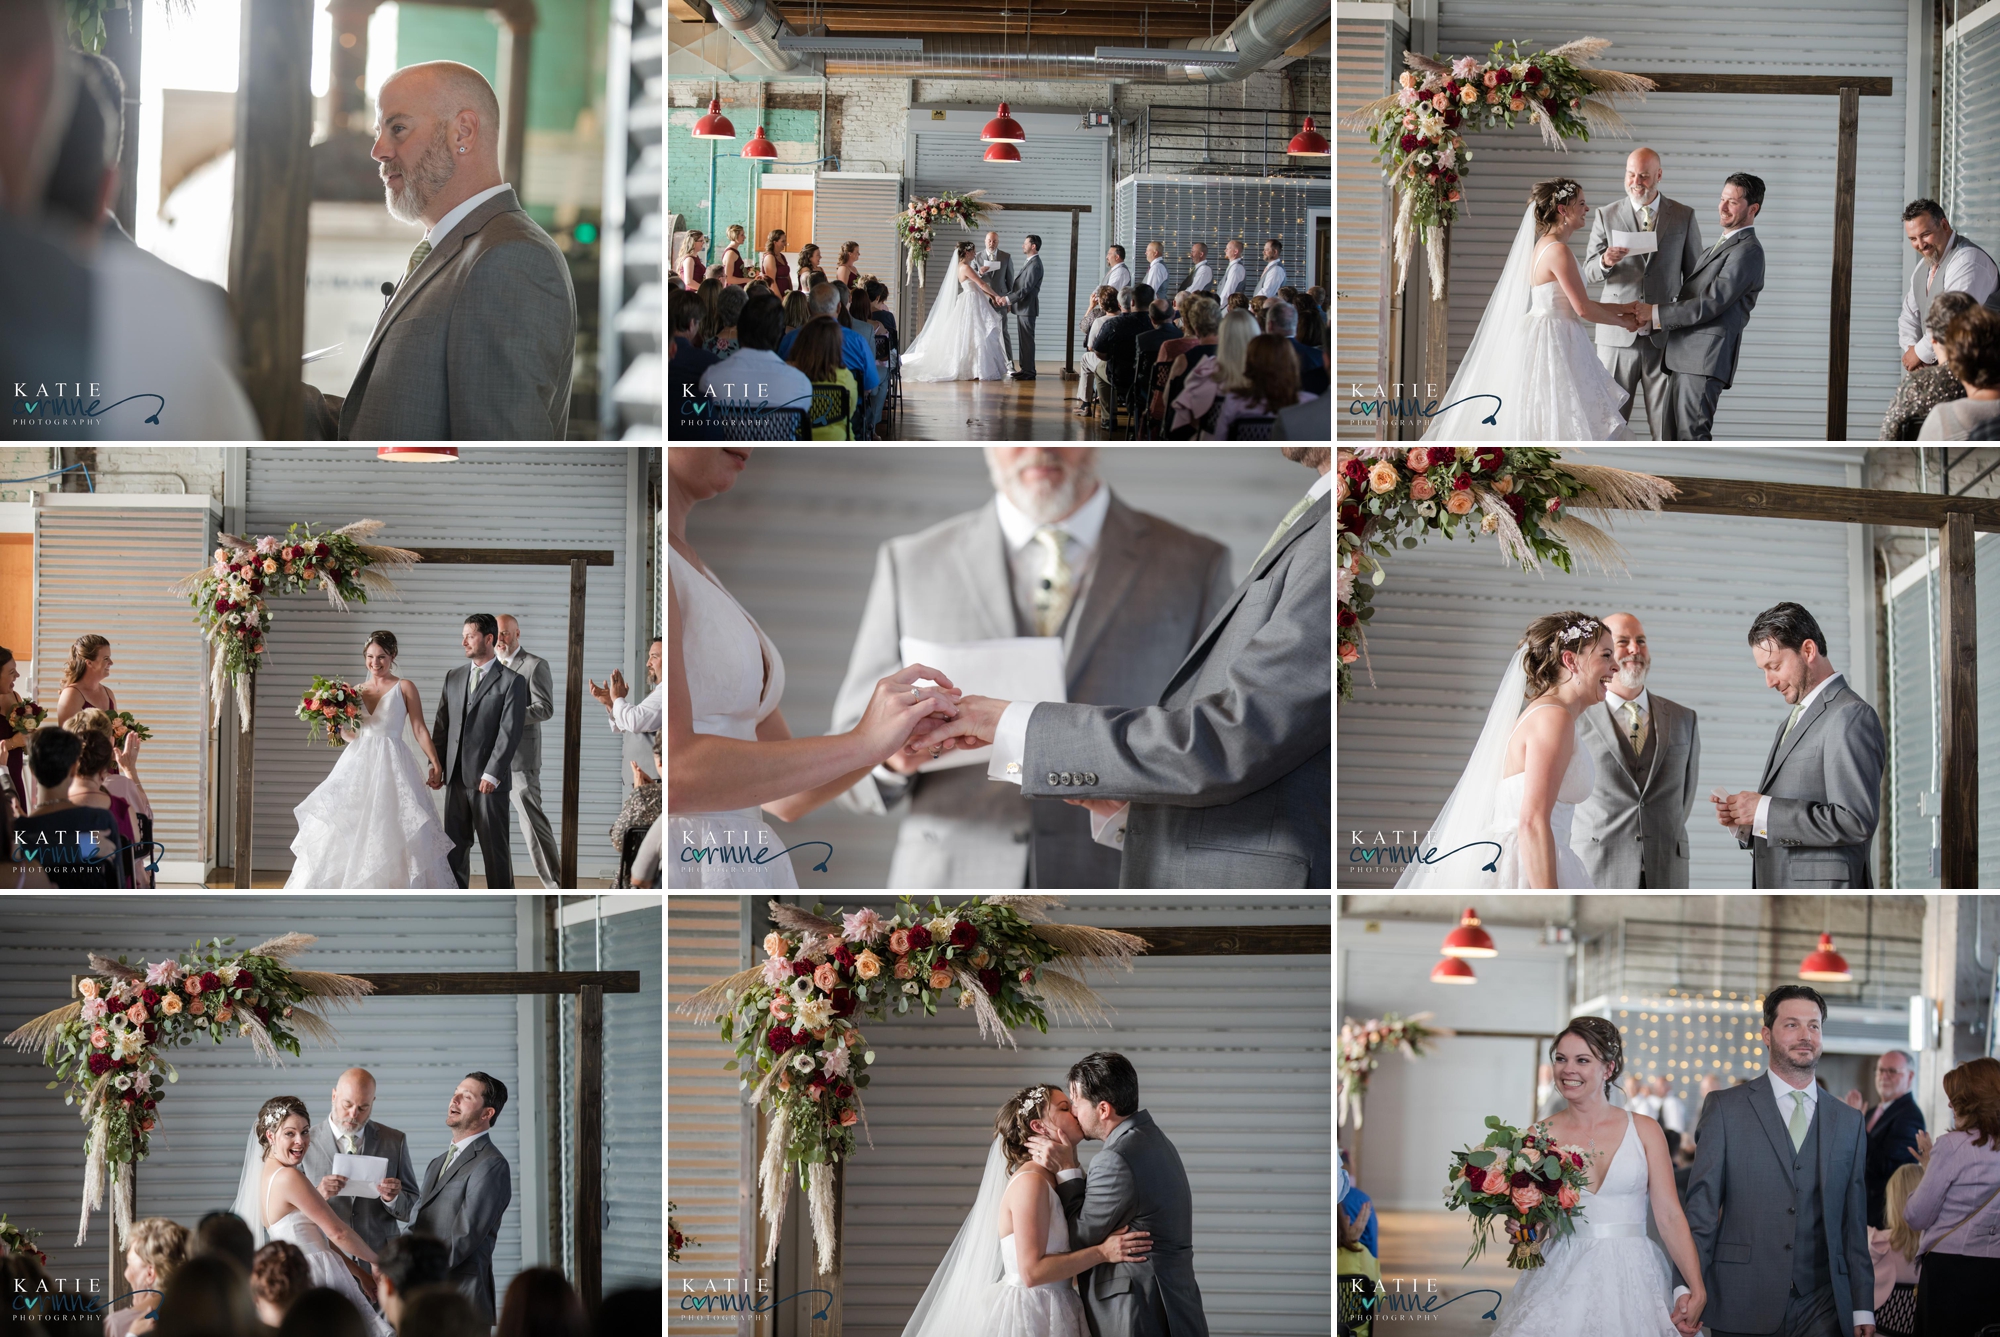 Urban Denver wedding ceremony at the studios at overland crossing